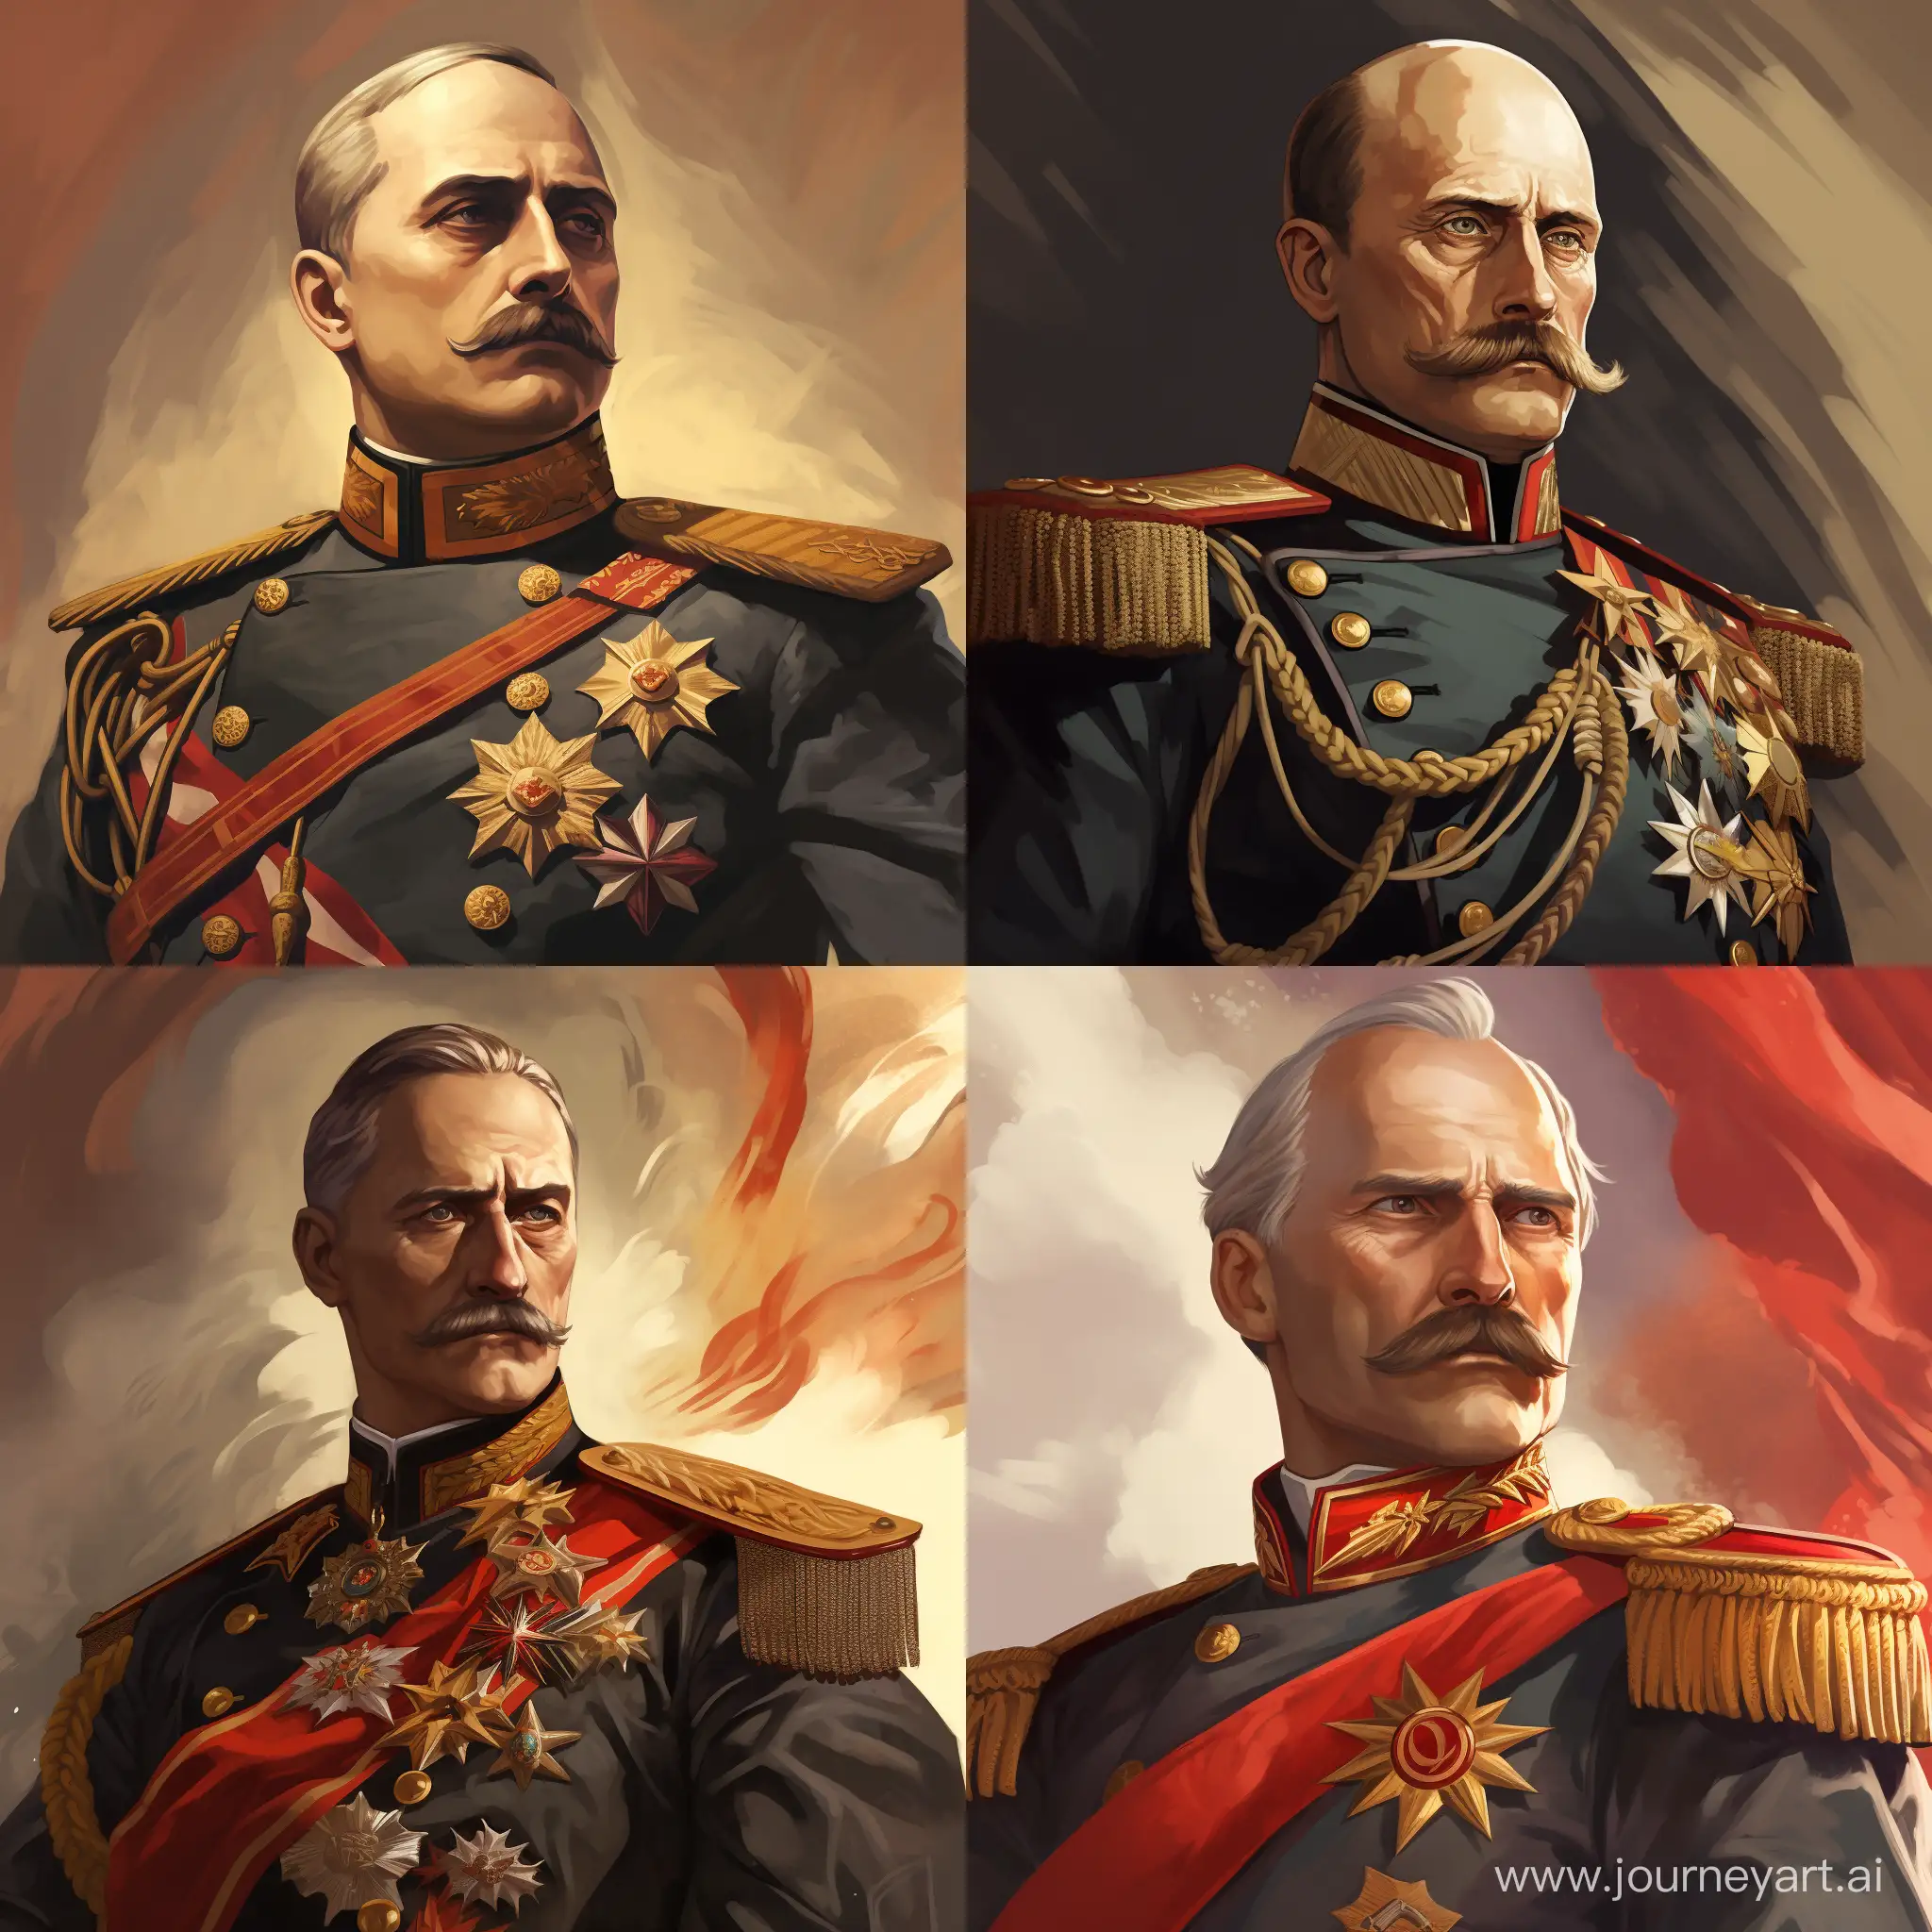 Political-Portraiture-Putin-in-the-Style-of-the-Great-Kaiser